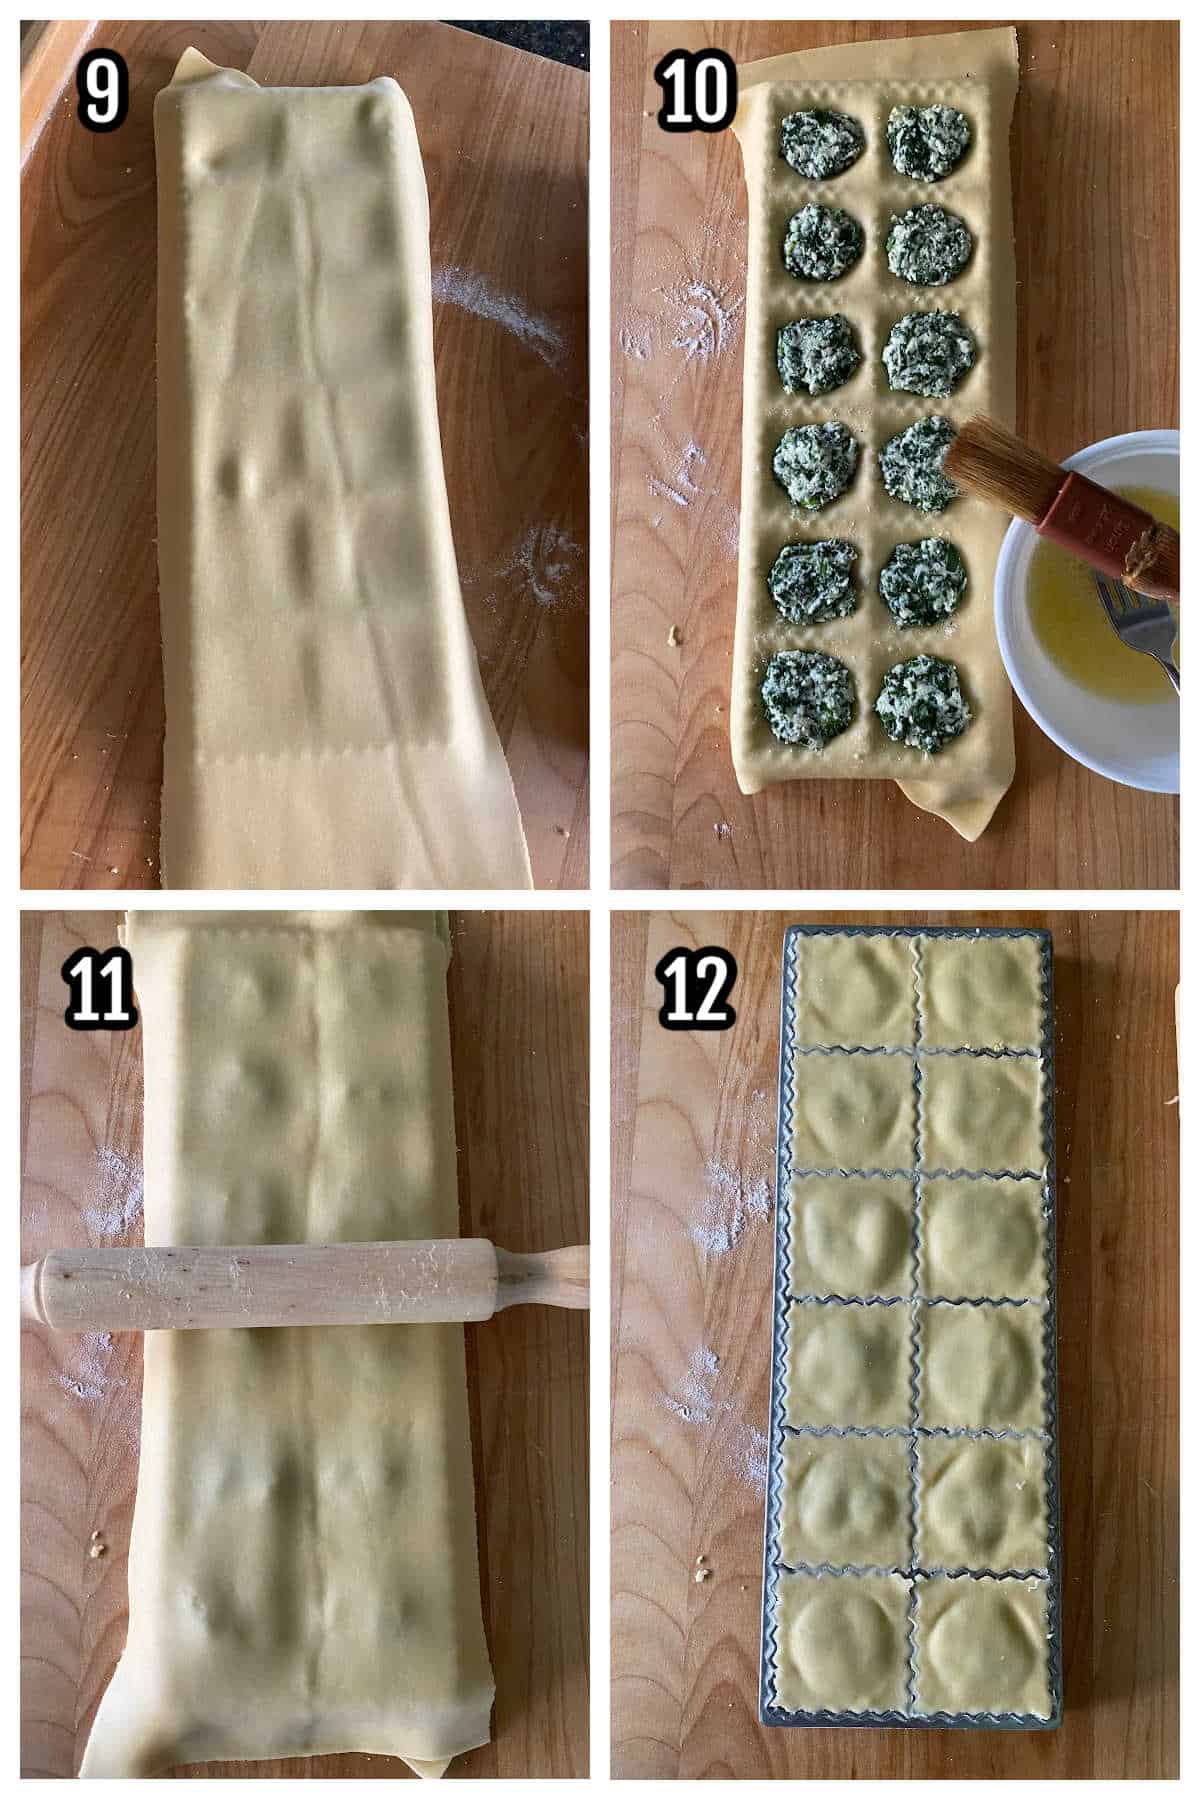 Collage of the steps nine through twelve to finishing the homemade spinach ricotta ravioli. 